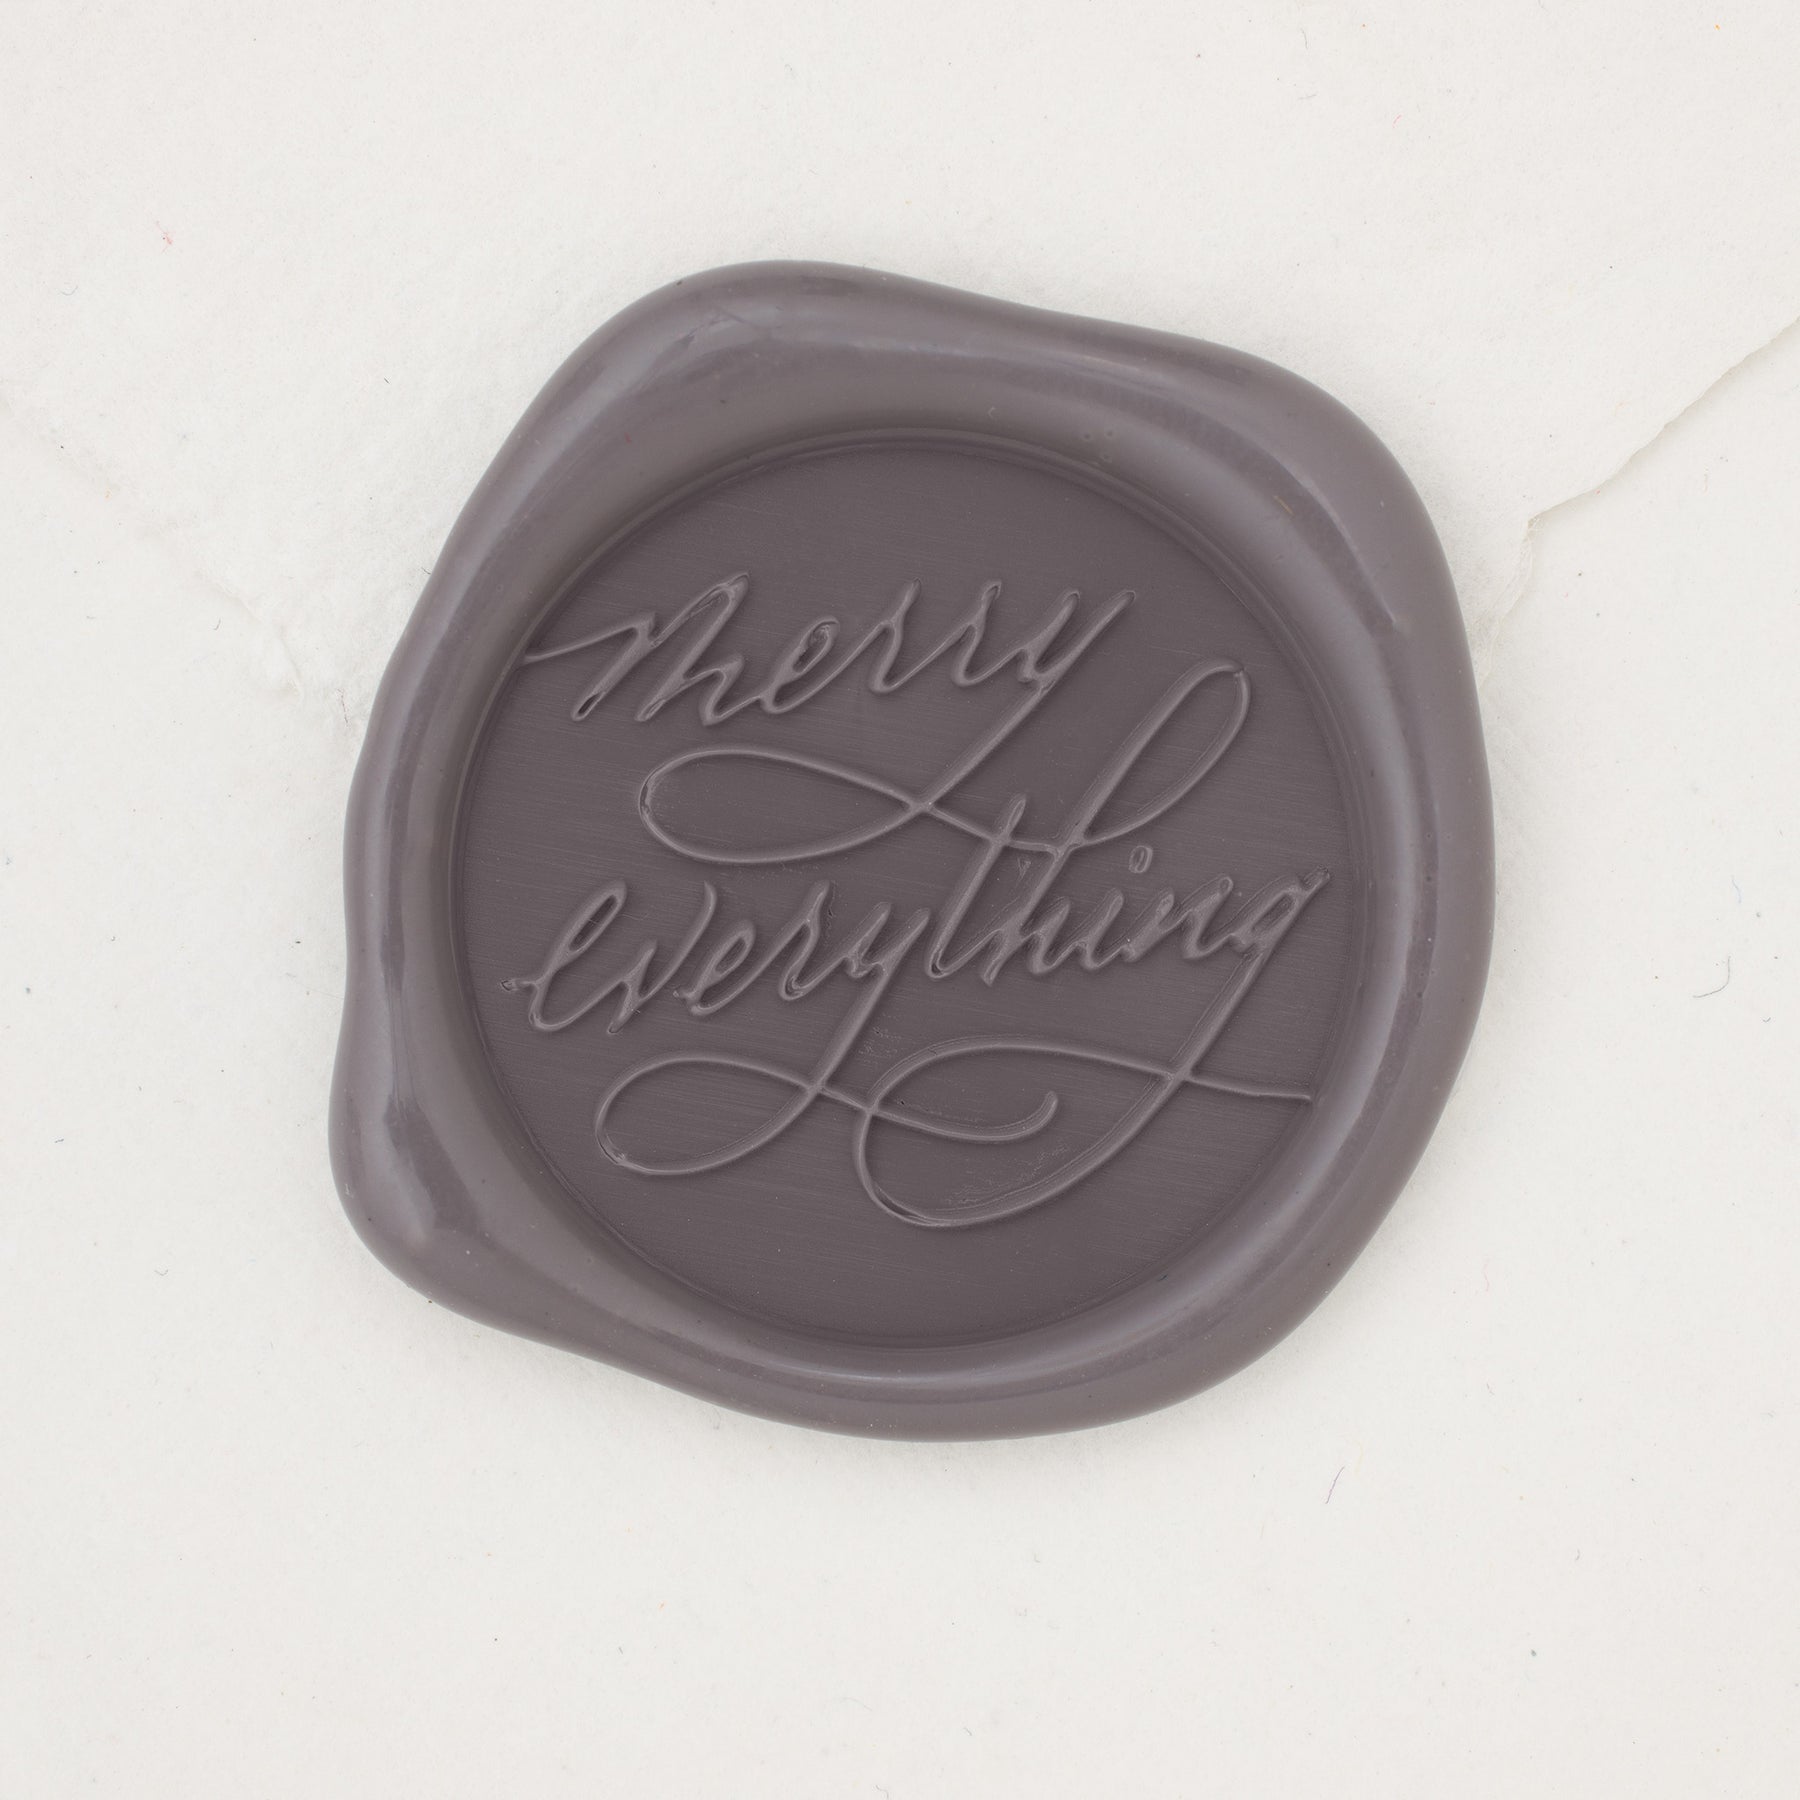 Merry Everything Wax Seals